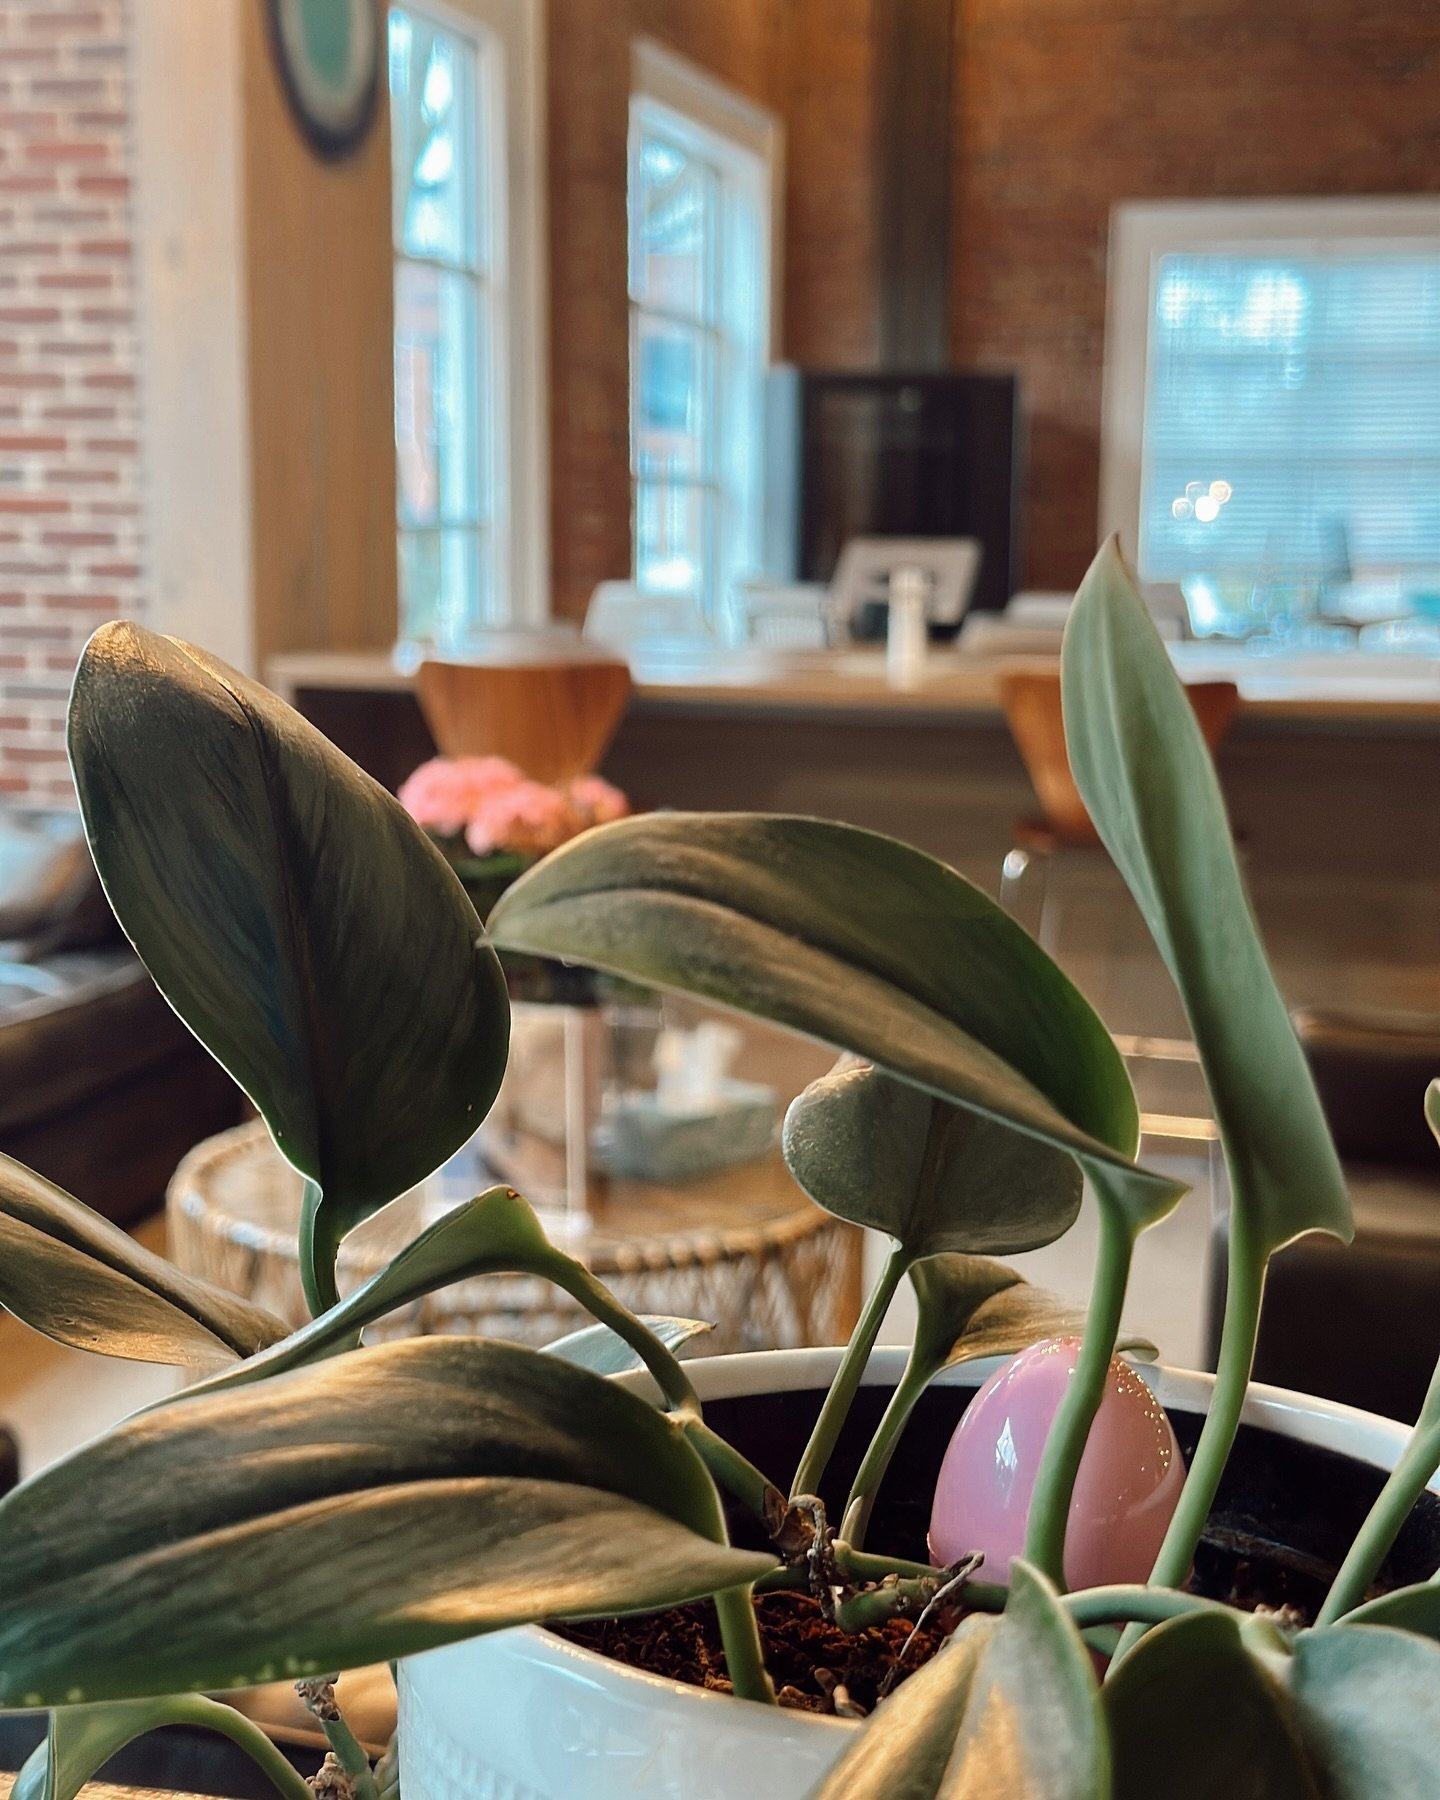 Combine work and play today with an Easter egg hunt at Cloudport! 🥚 Win free parking, day passes and meeting room credits! Claim your prize with River at the front desk. 🐰 

#happyeaster #cloudport #happyfriday #portlandme #coworking